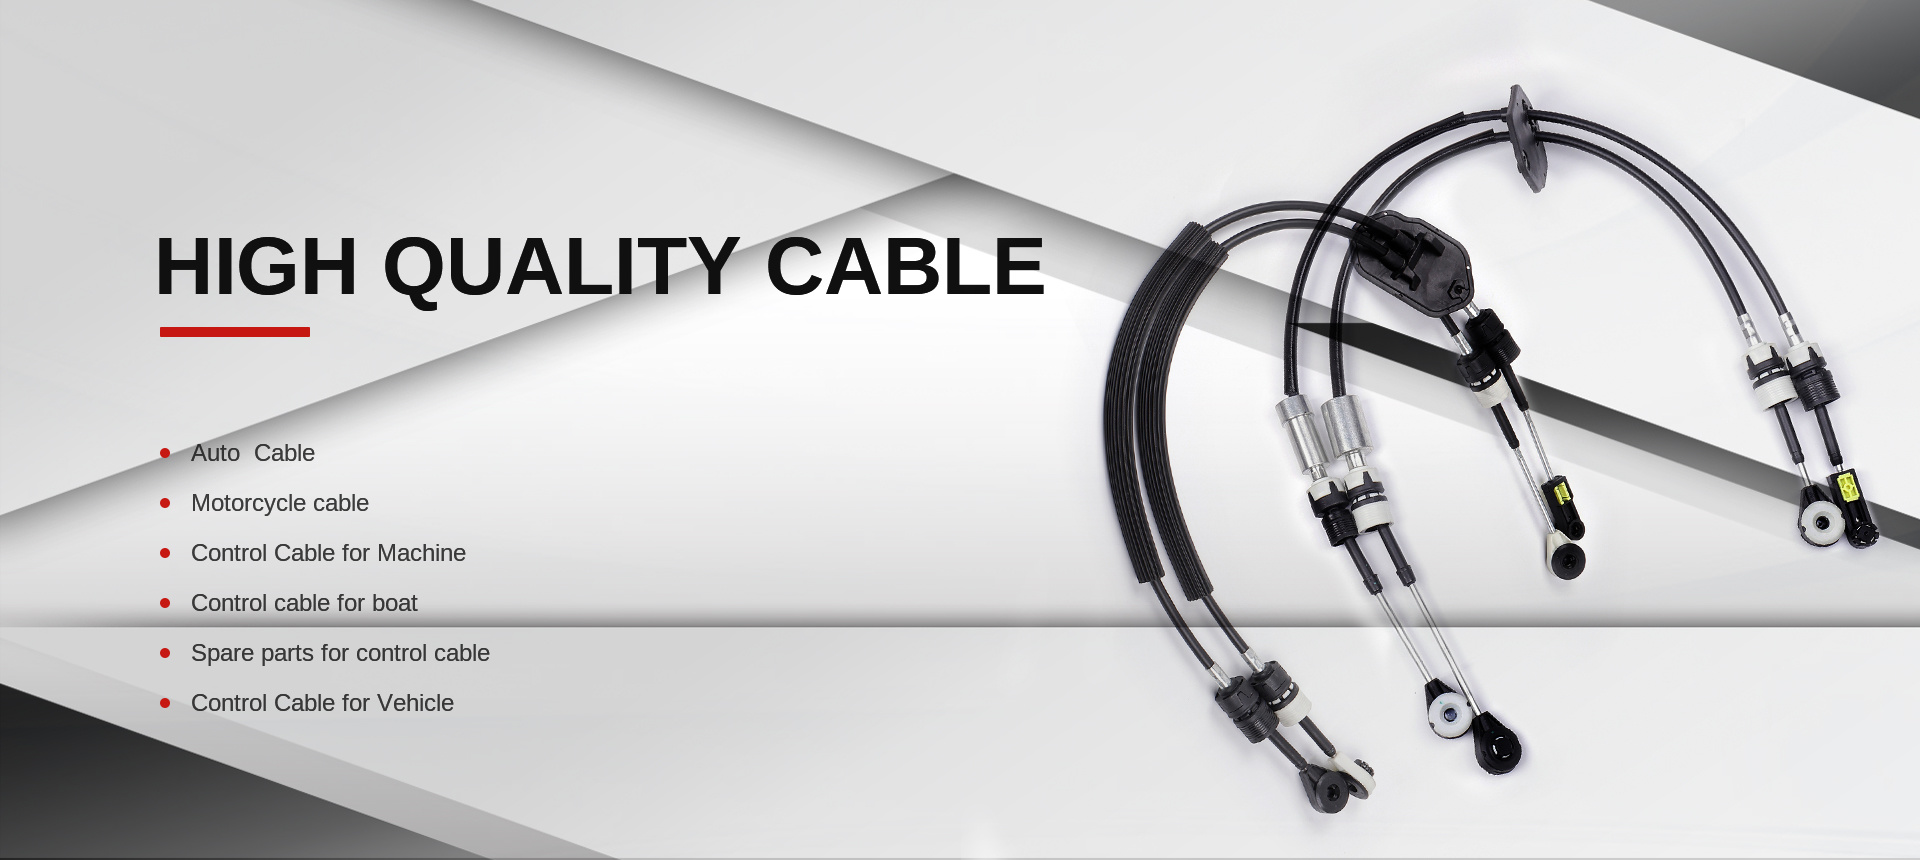 High quality cable